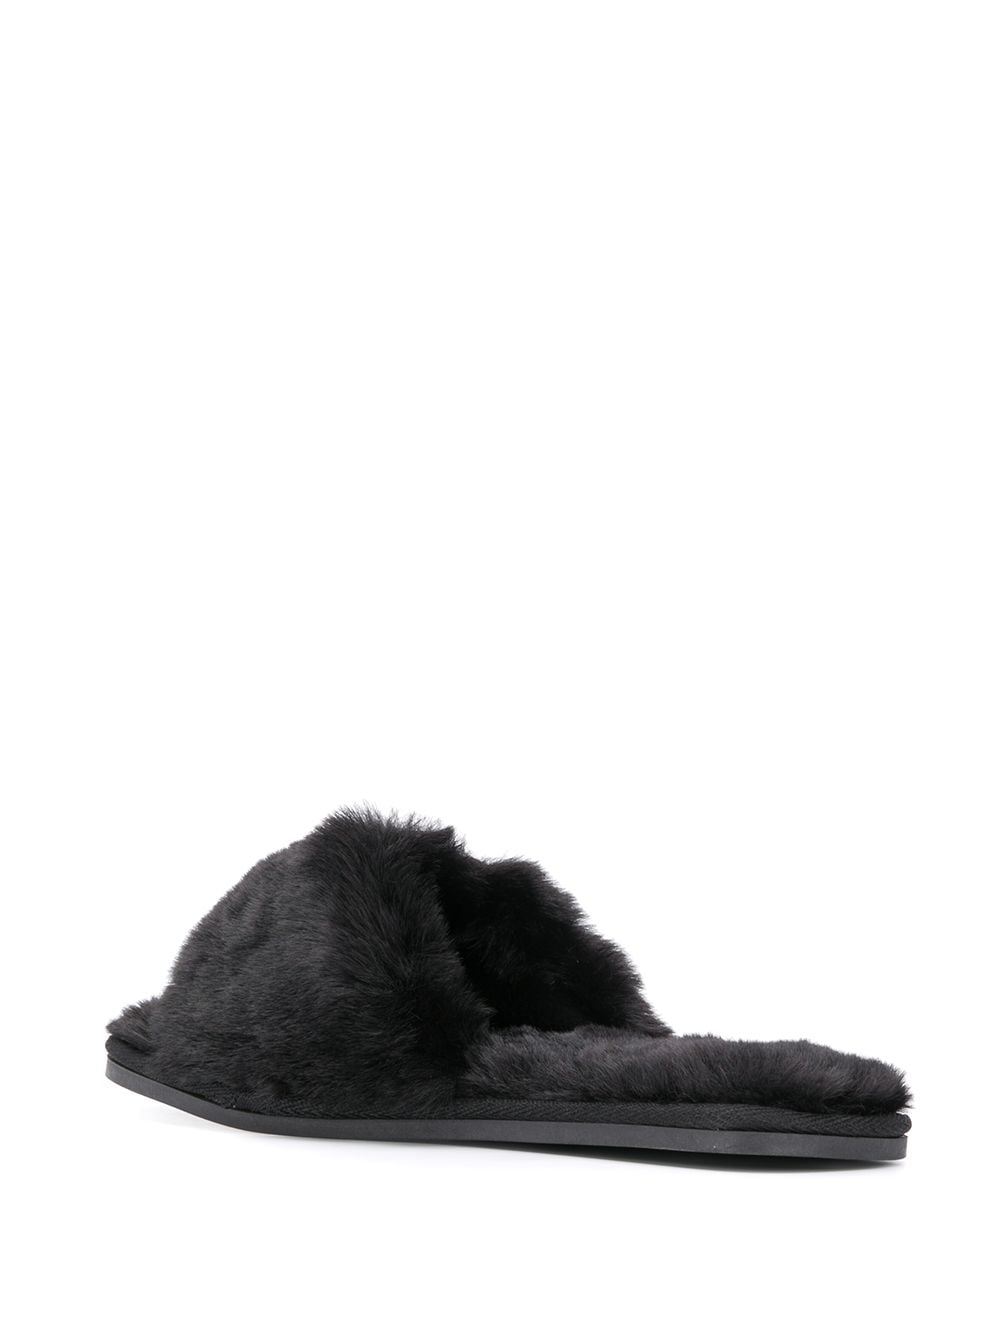 Karl Lagerfeld Ikonic Embroidered Slippers - Farfetch